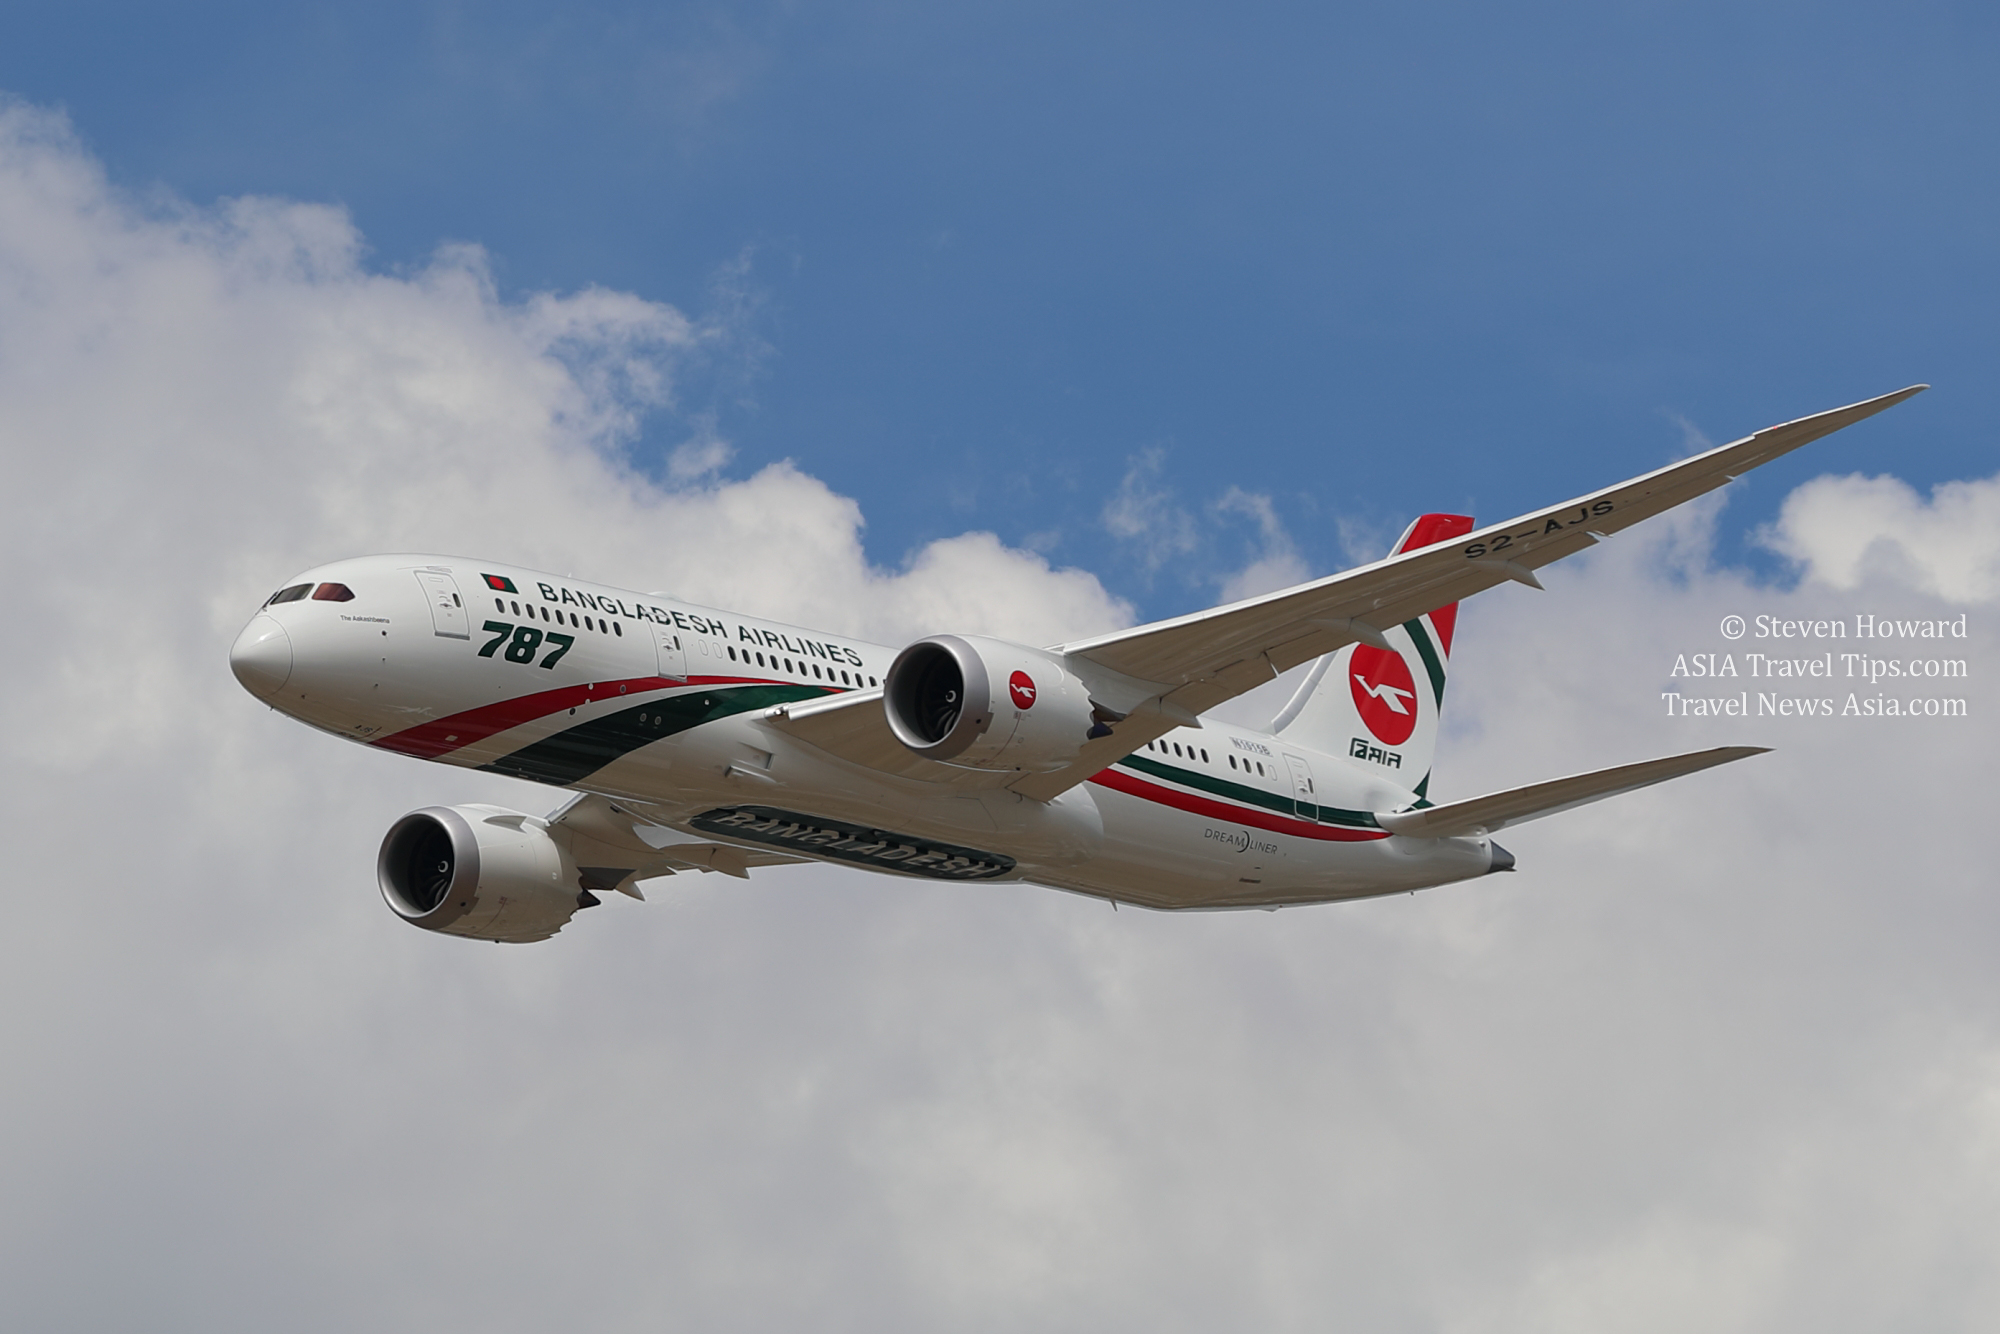 Biman Bangladesh Airlines Boeing 787 Dreamliner. Picture by Steven Howard of TravelNewsAsia.com Click to enlarge.